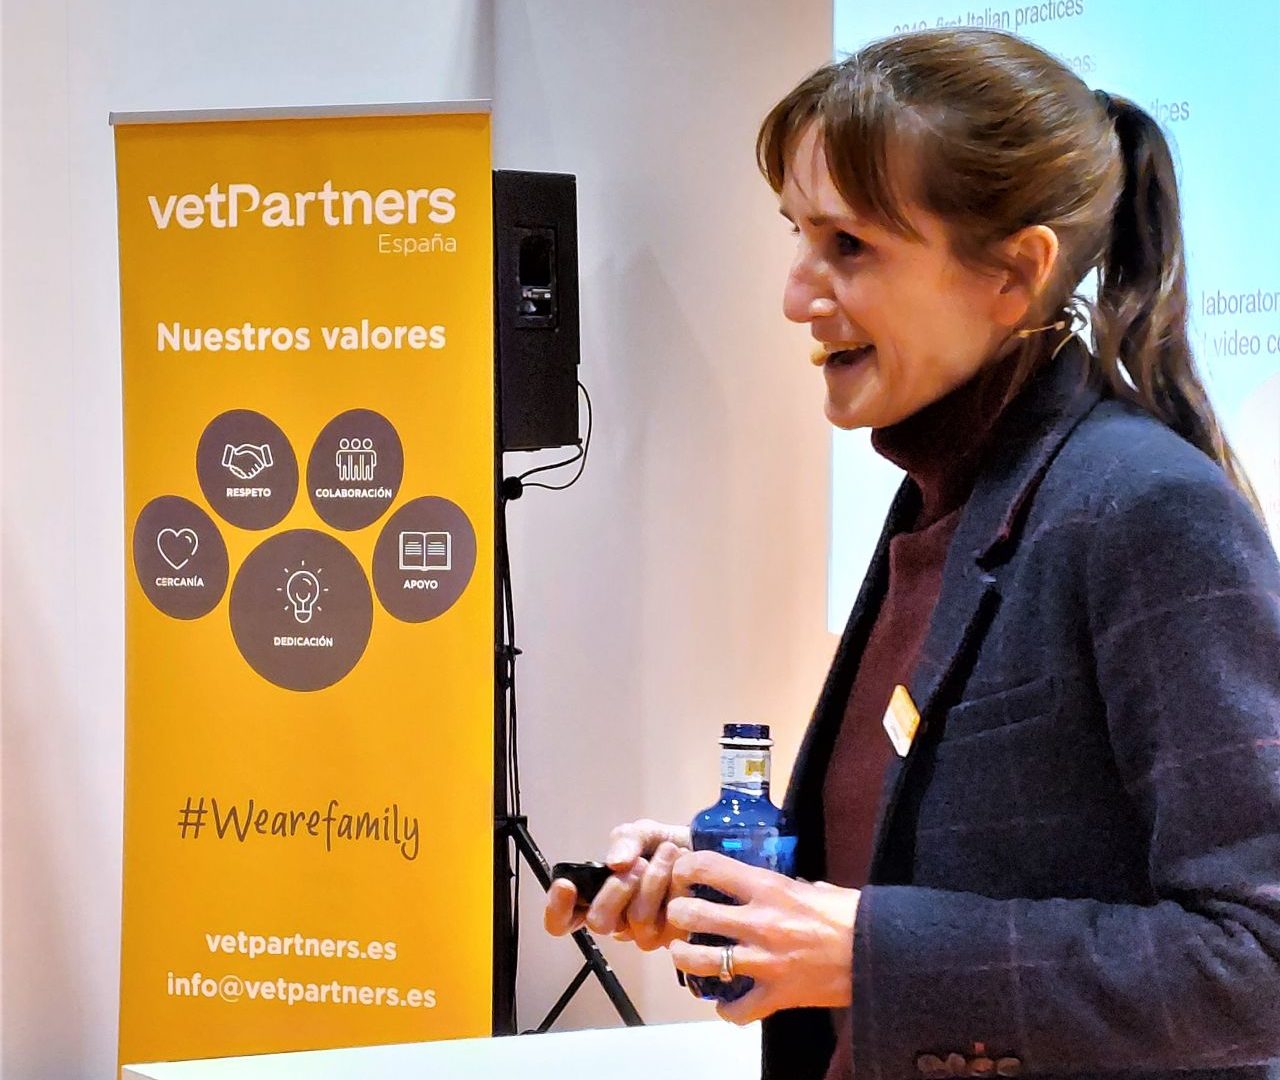 VetPartners’ European growth continues with addition of leading Spanish group